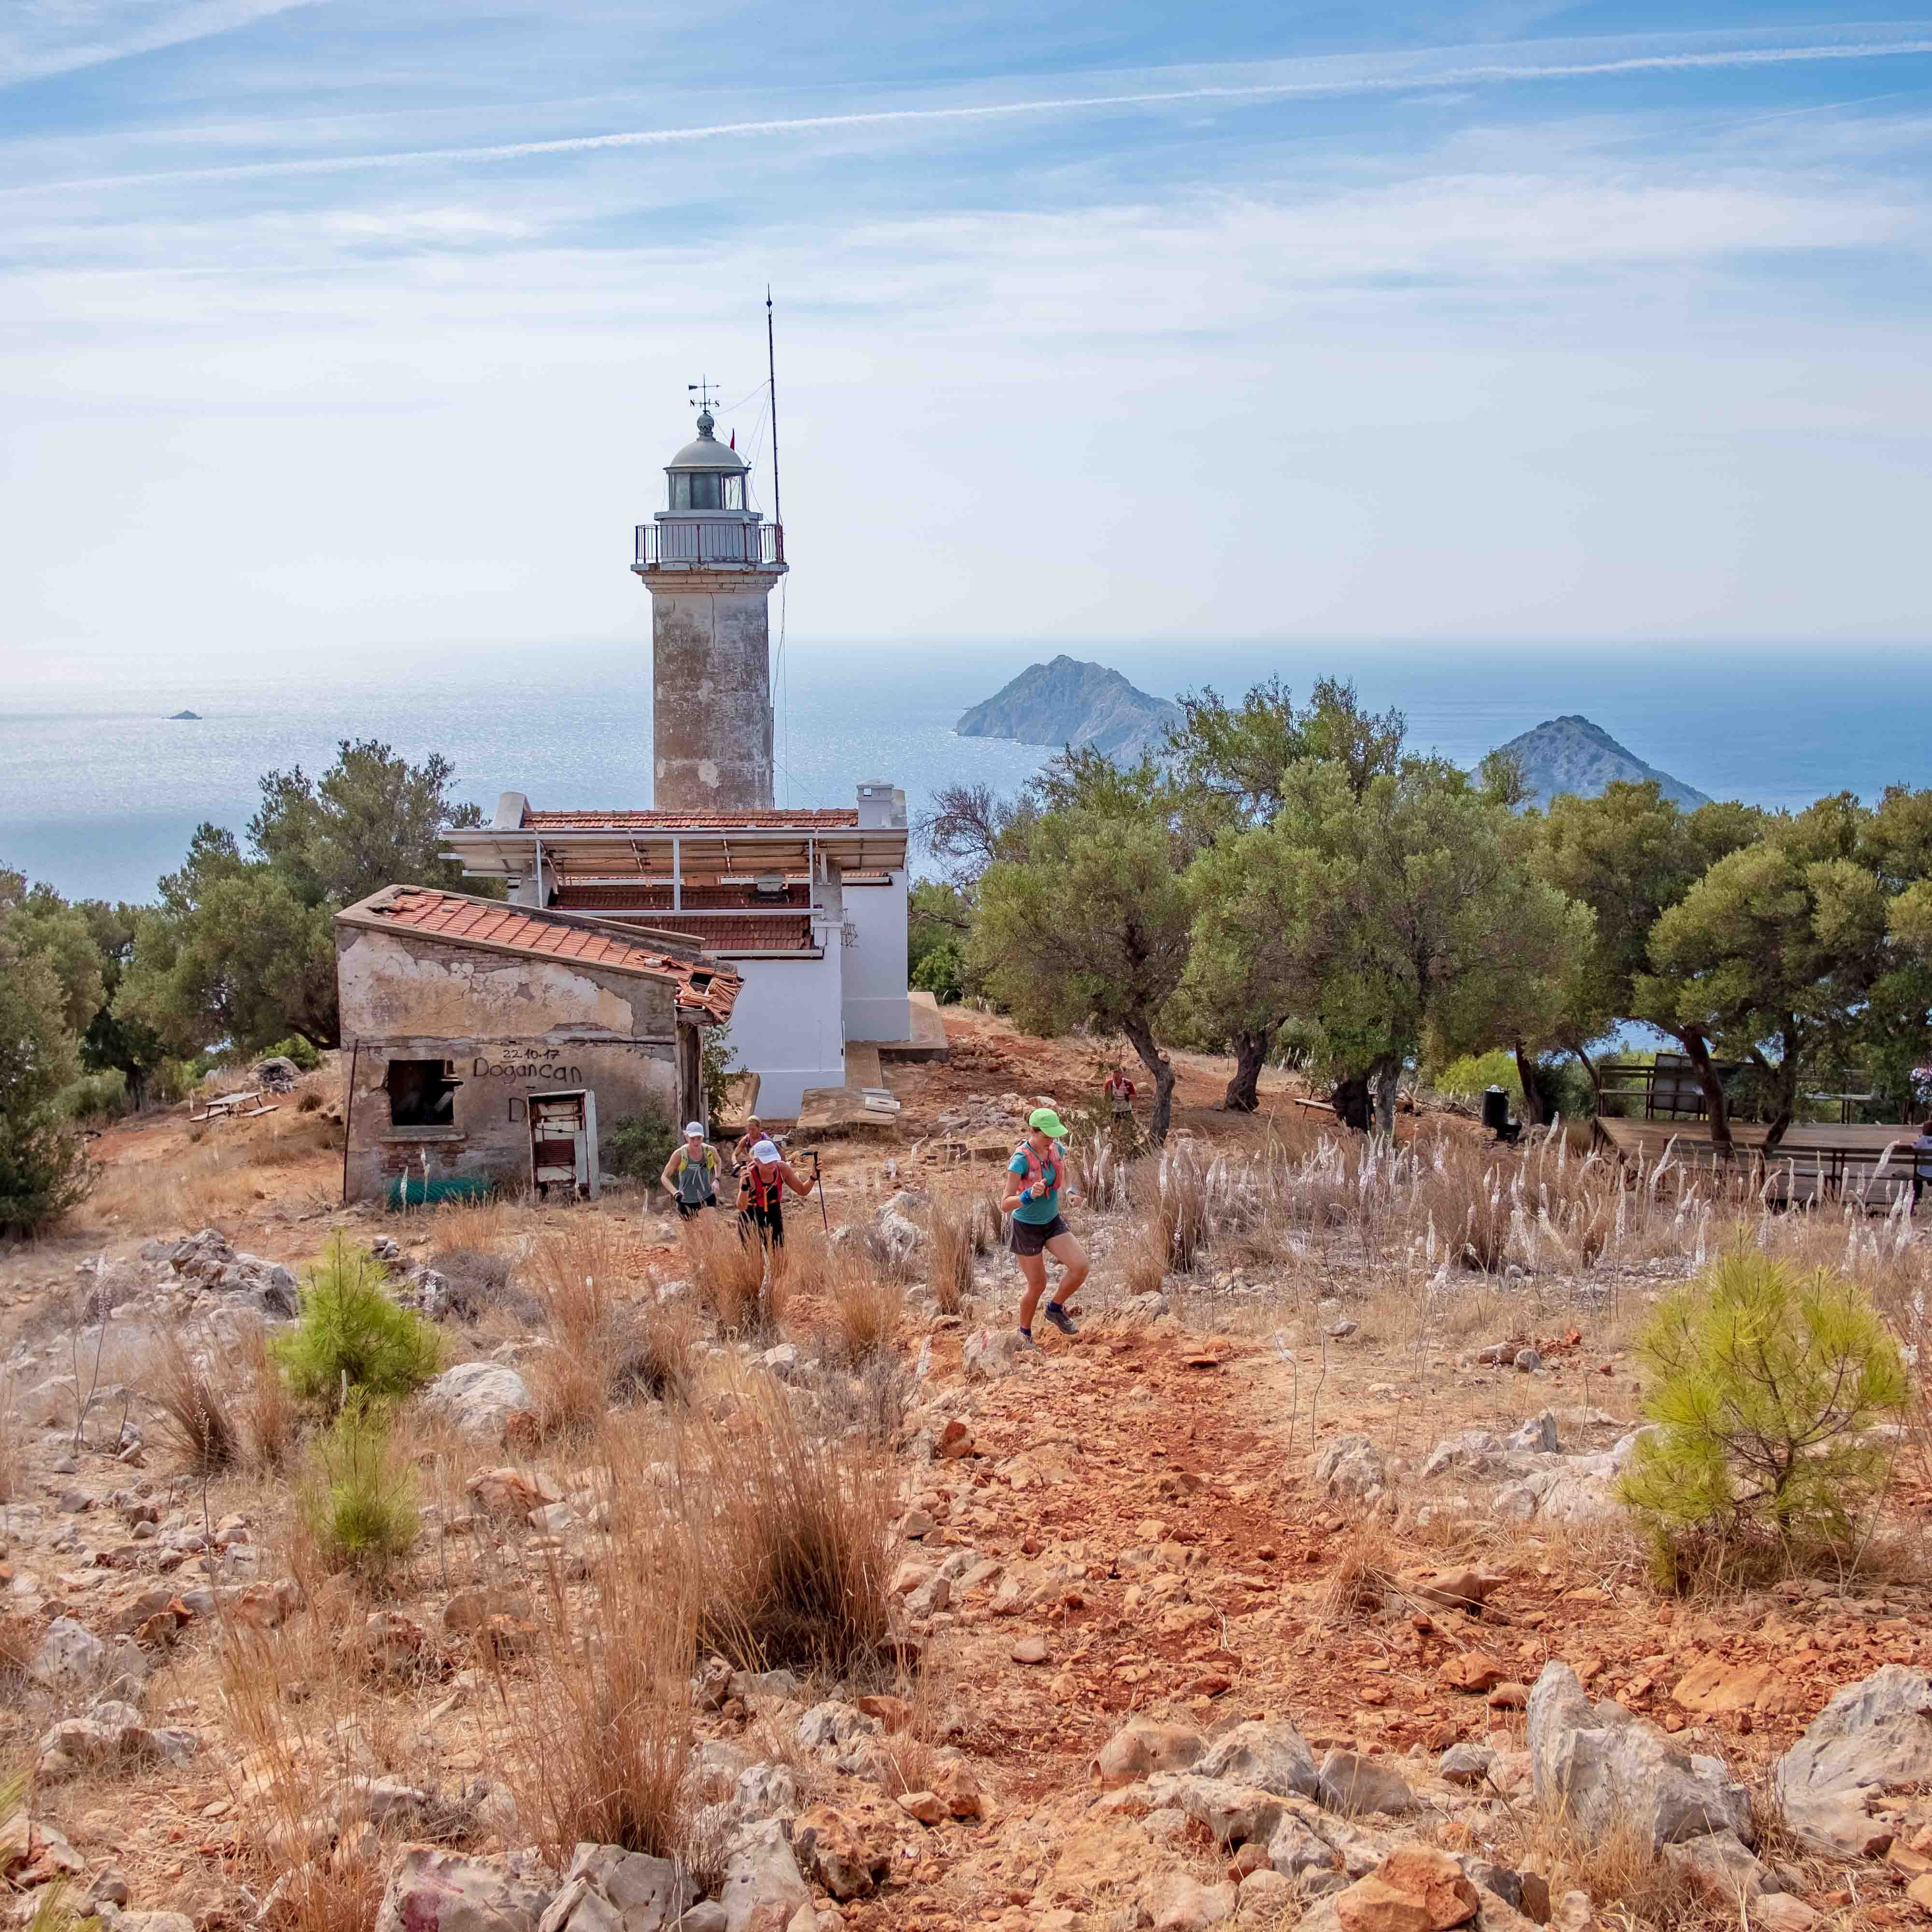 Hikers walking up the Gelidonya Lighthouse on Lycian Way